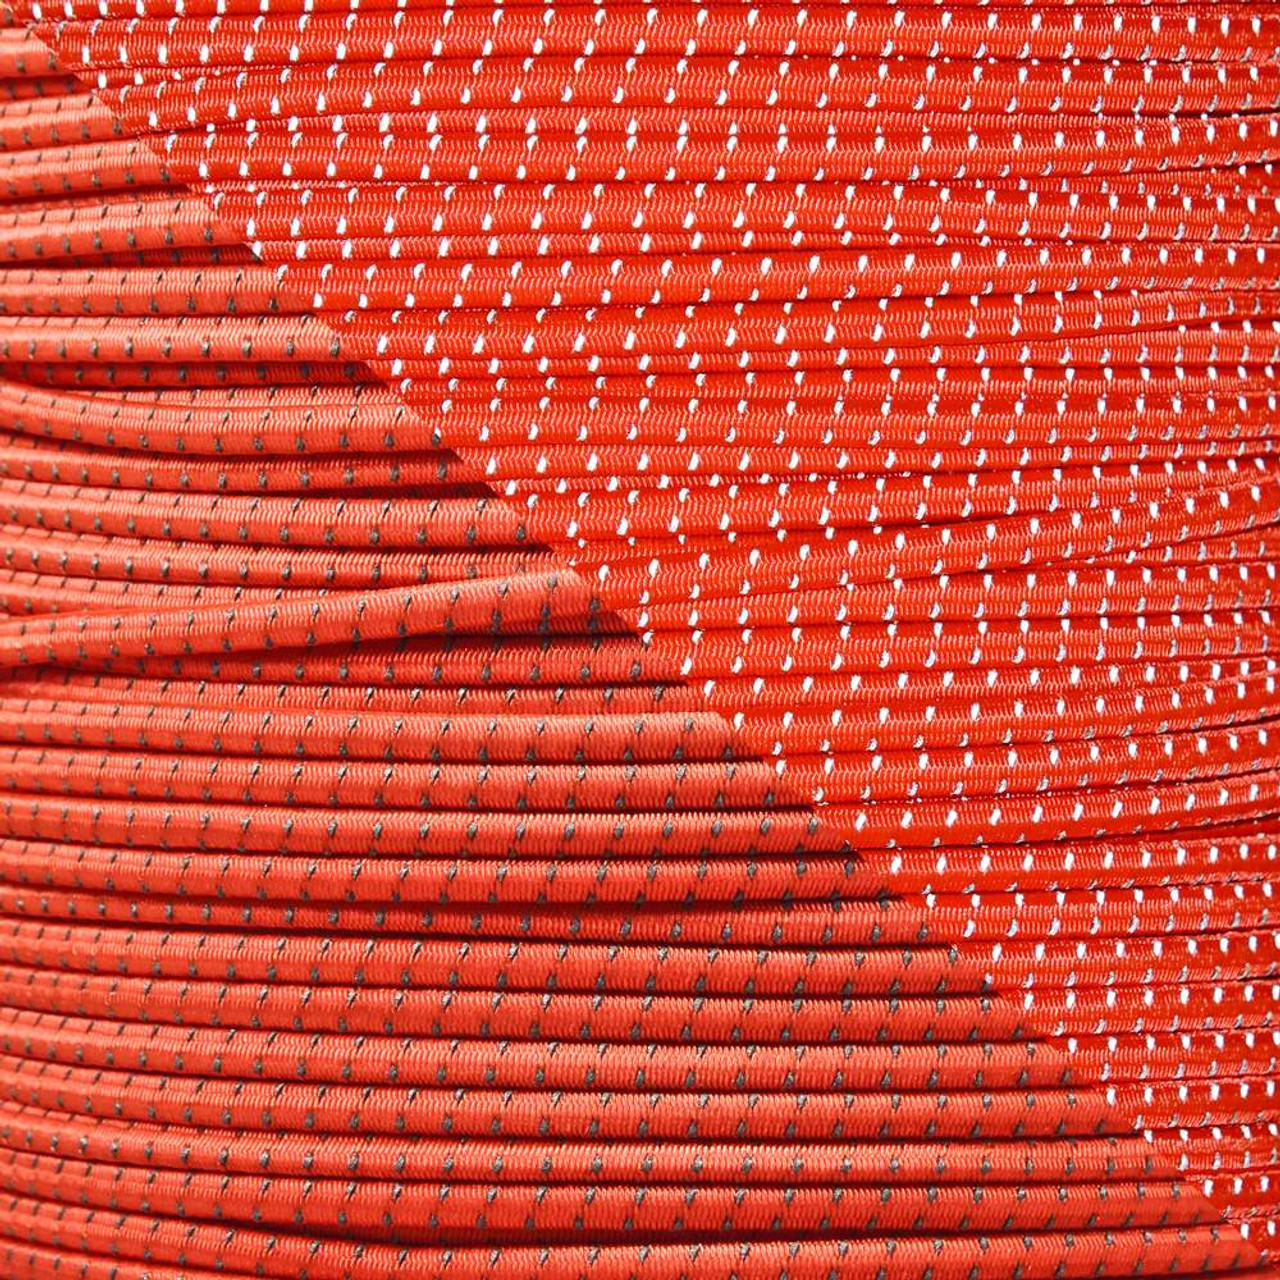 Neon Orange - 1/8 inch Shock Cord with Reflective Tracers